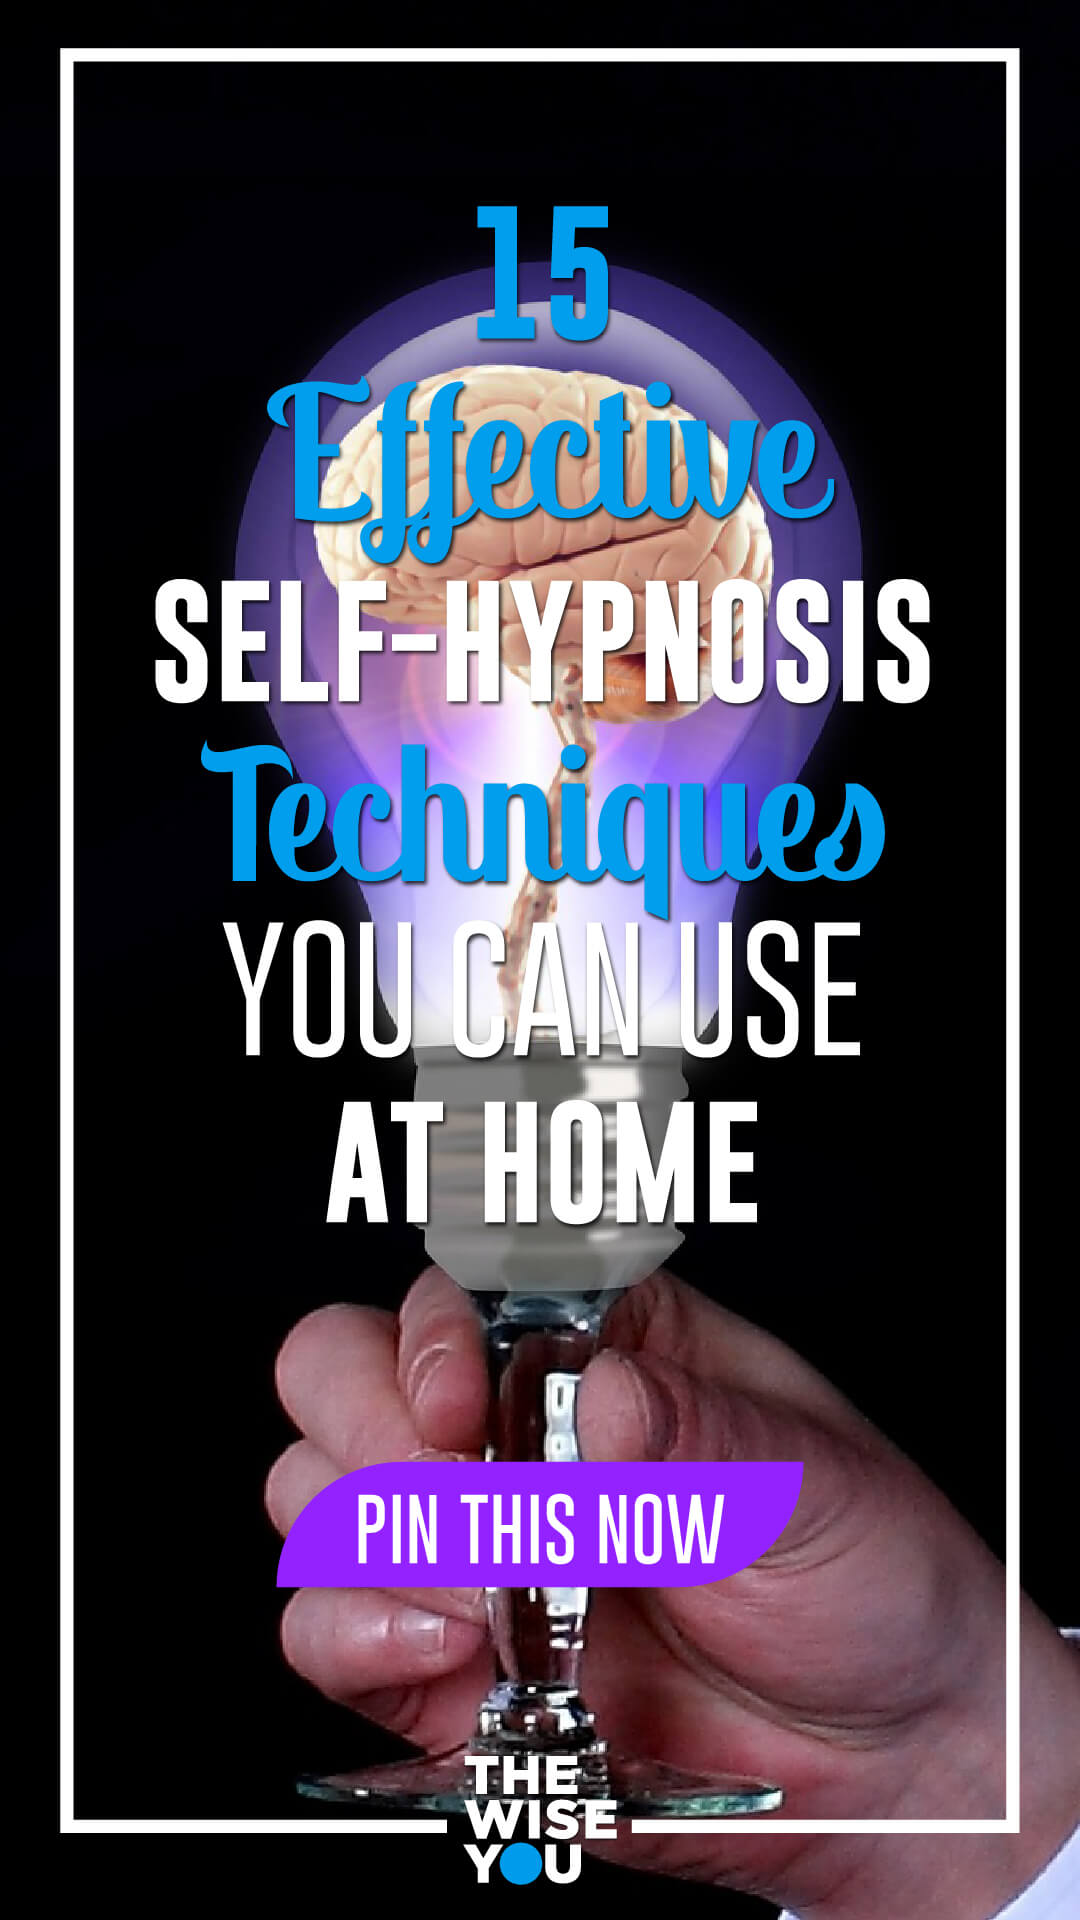 15 Effective Self-Hypnosis Techniques You Can Use at Home